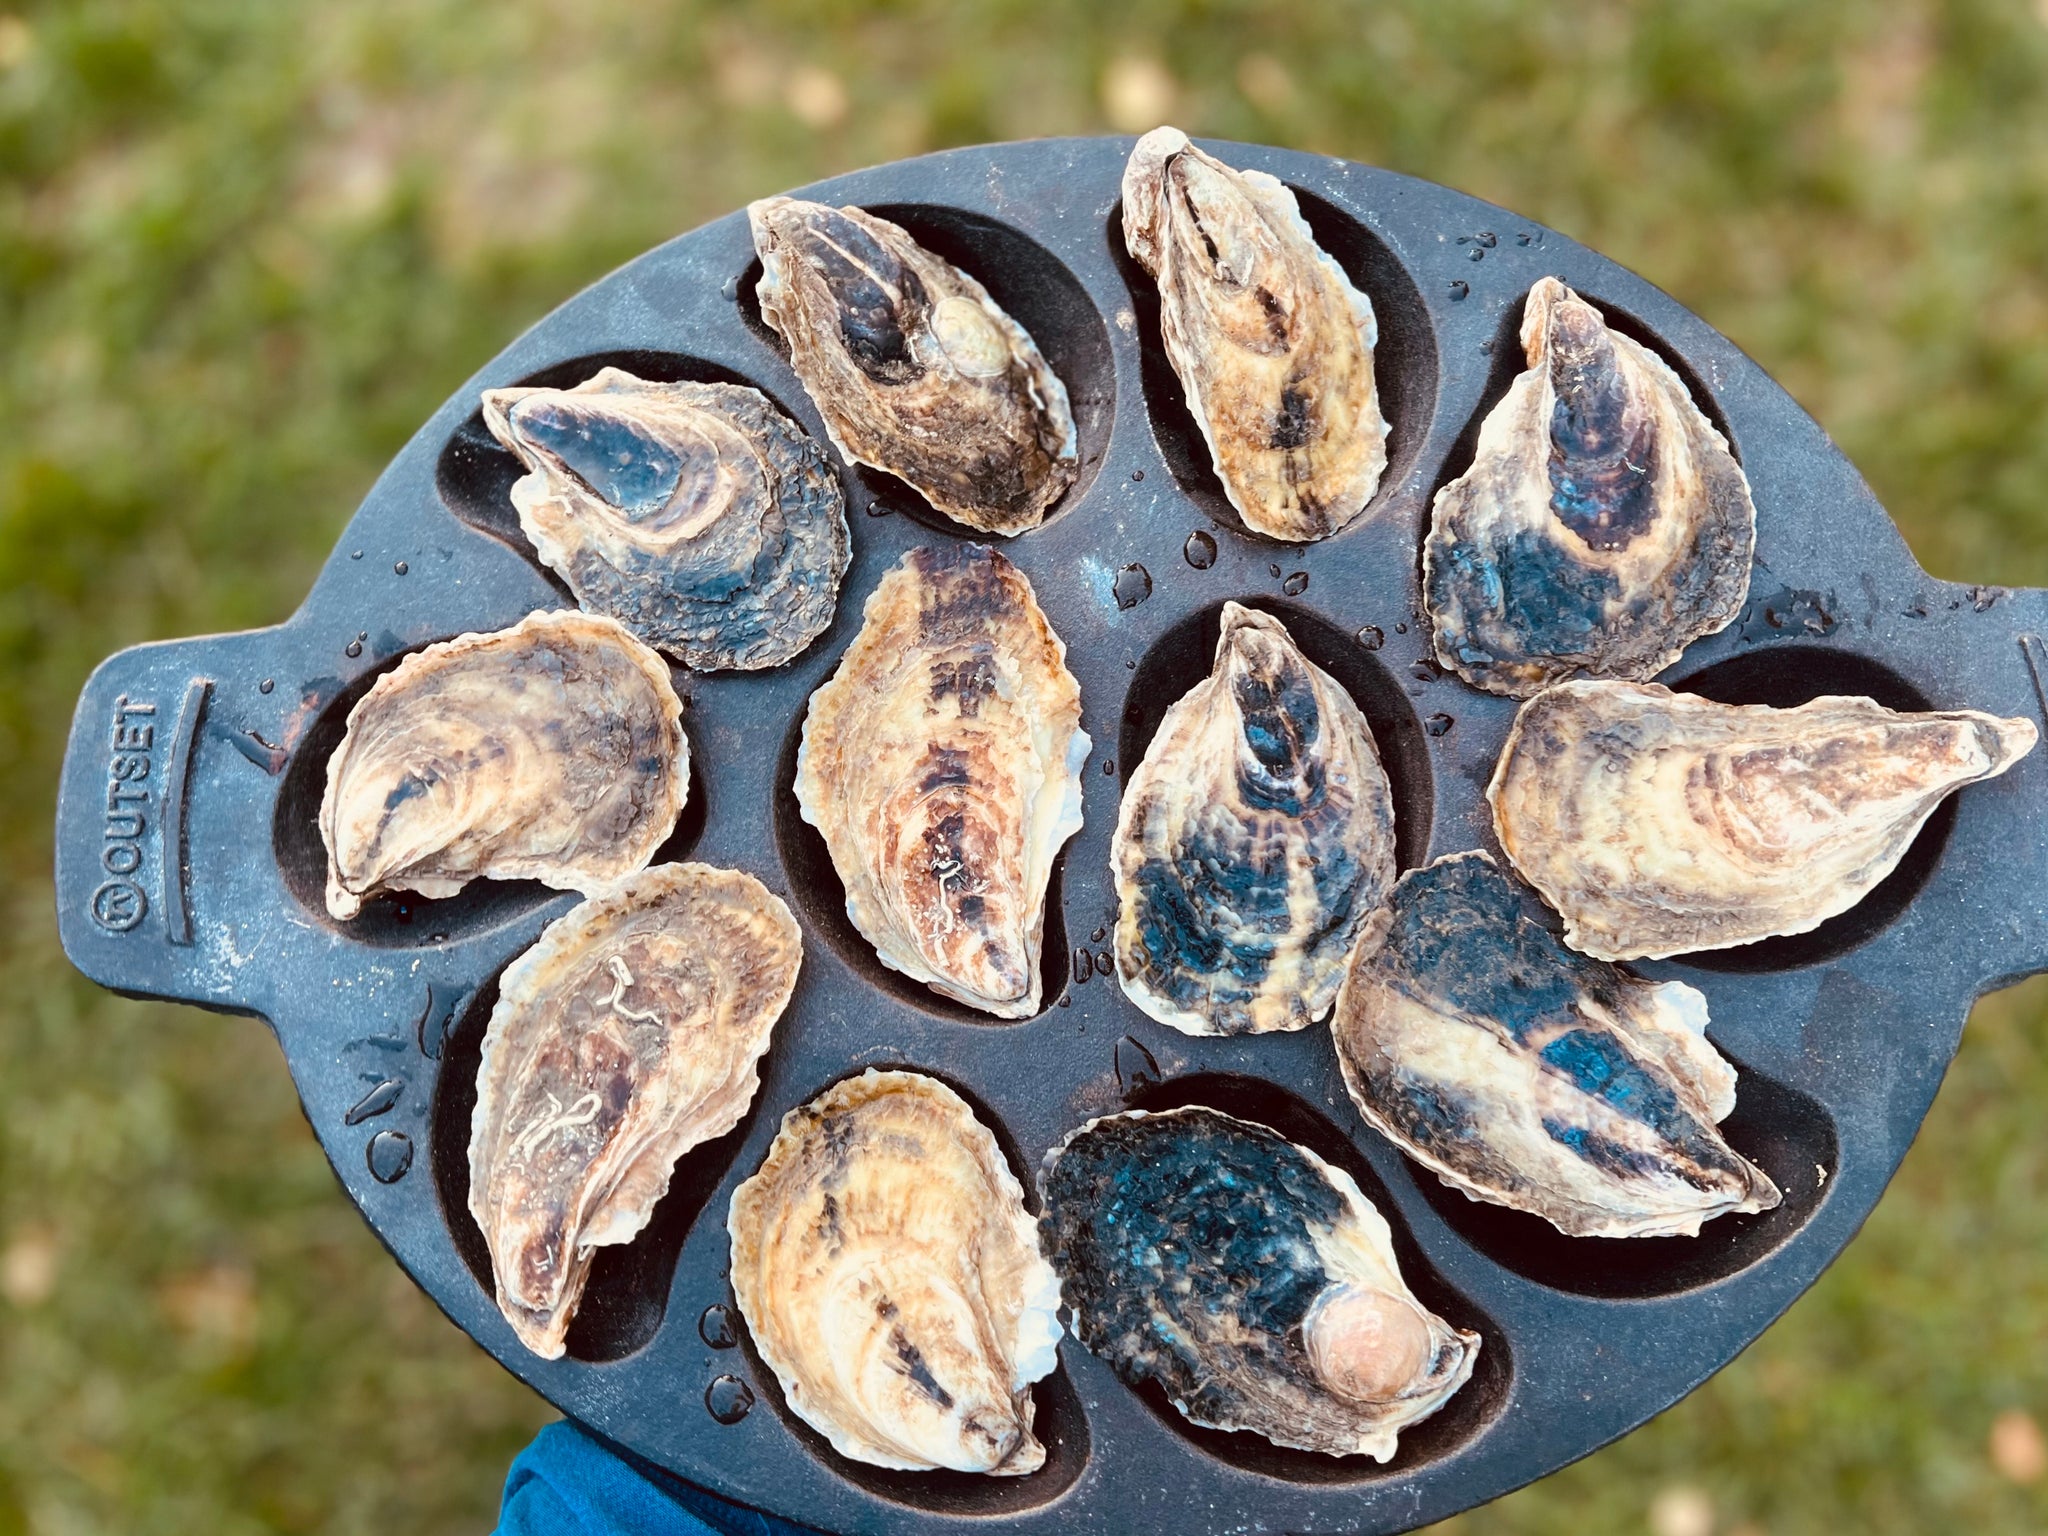 Outset Oyster Grill Pan